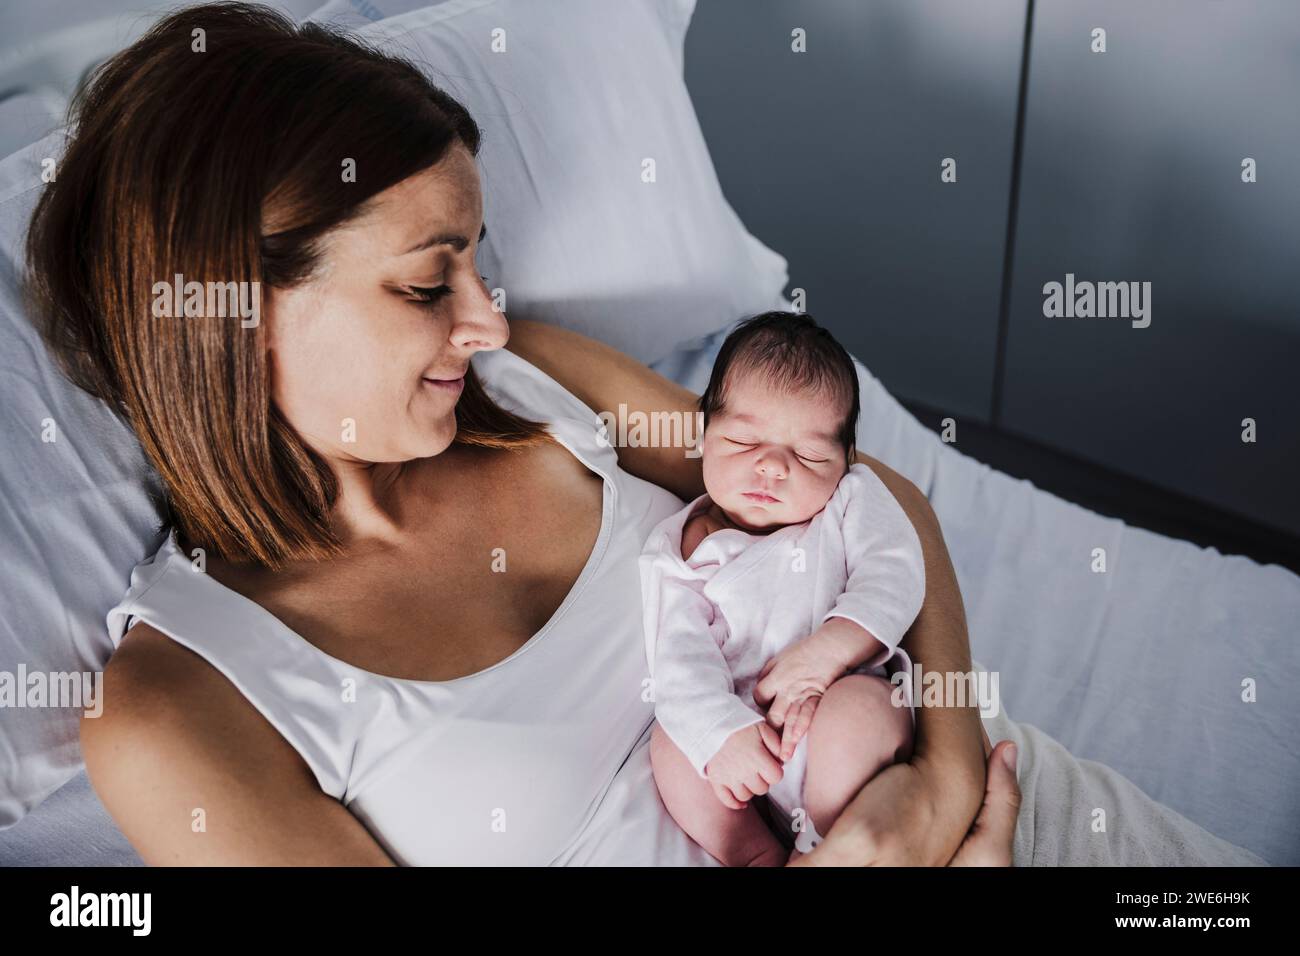 Baby girl sleeping in mother's arms at hospital Stock Photo